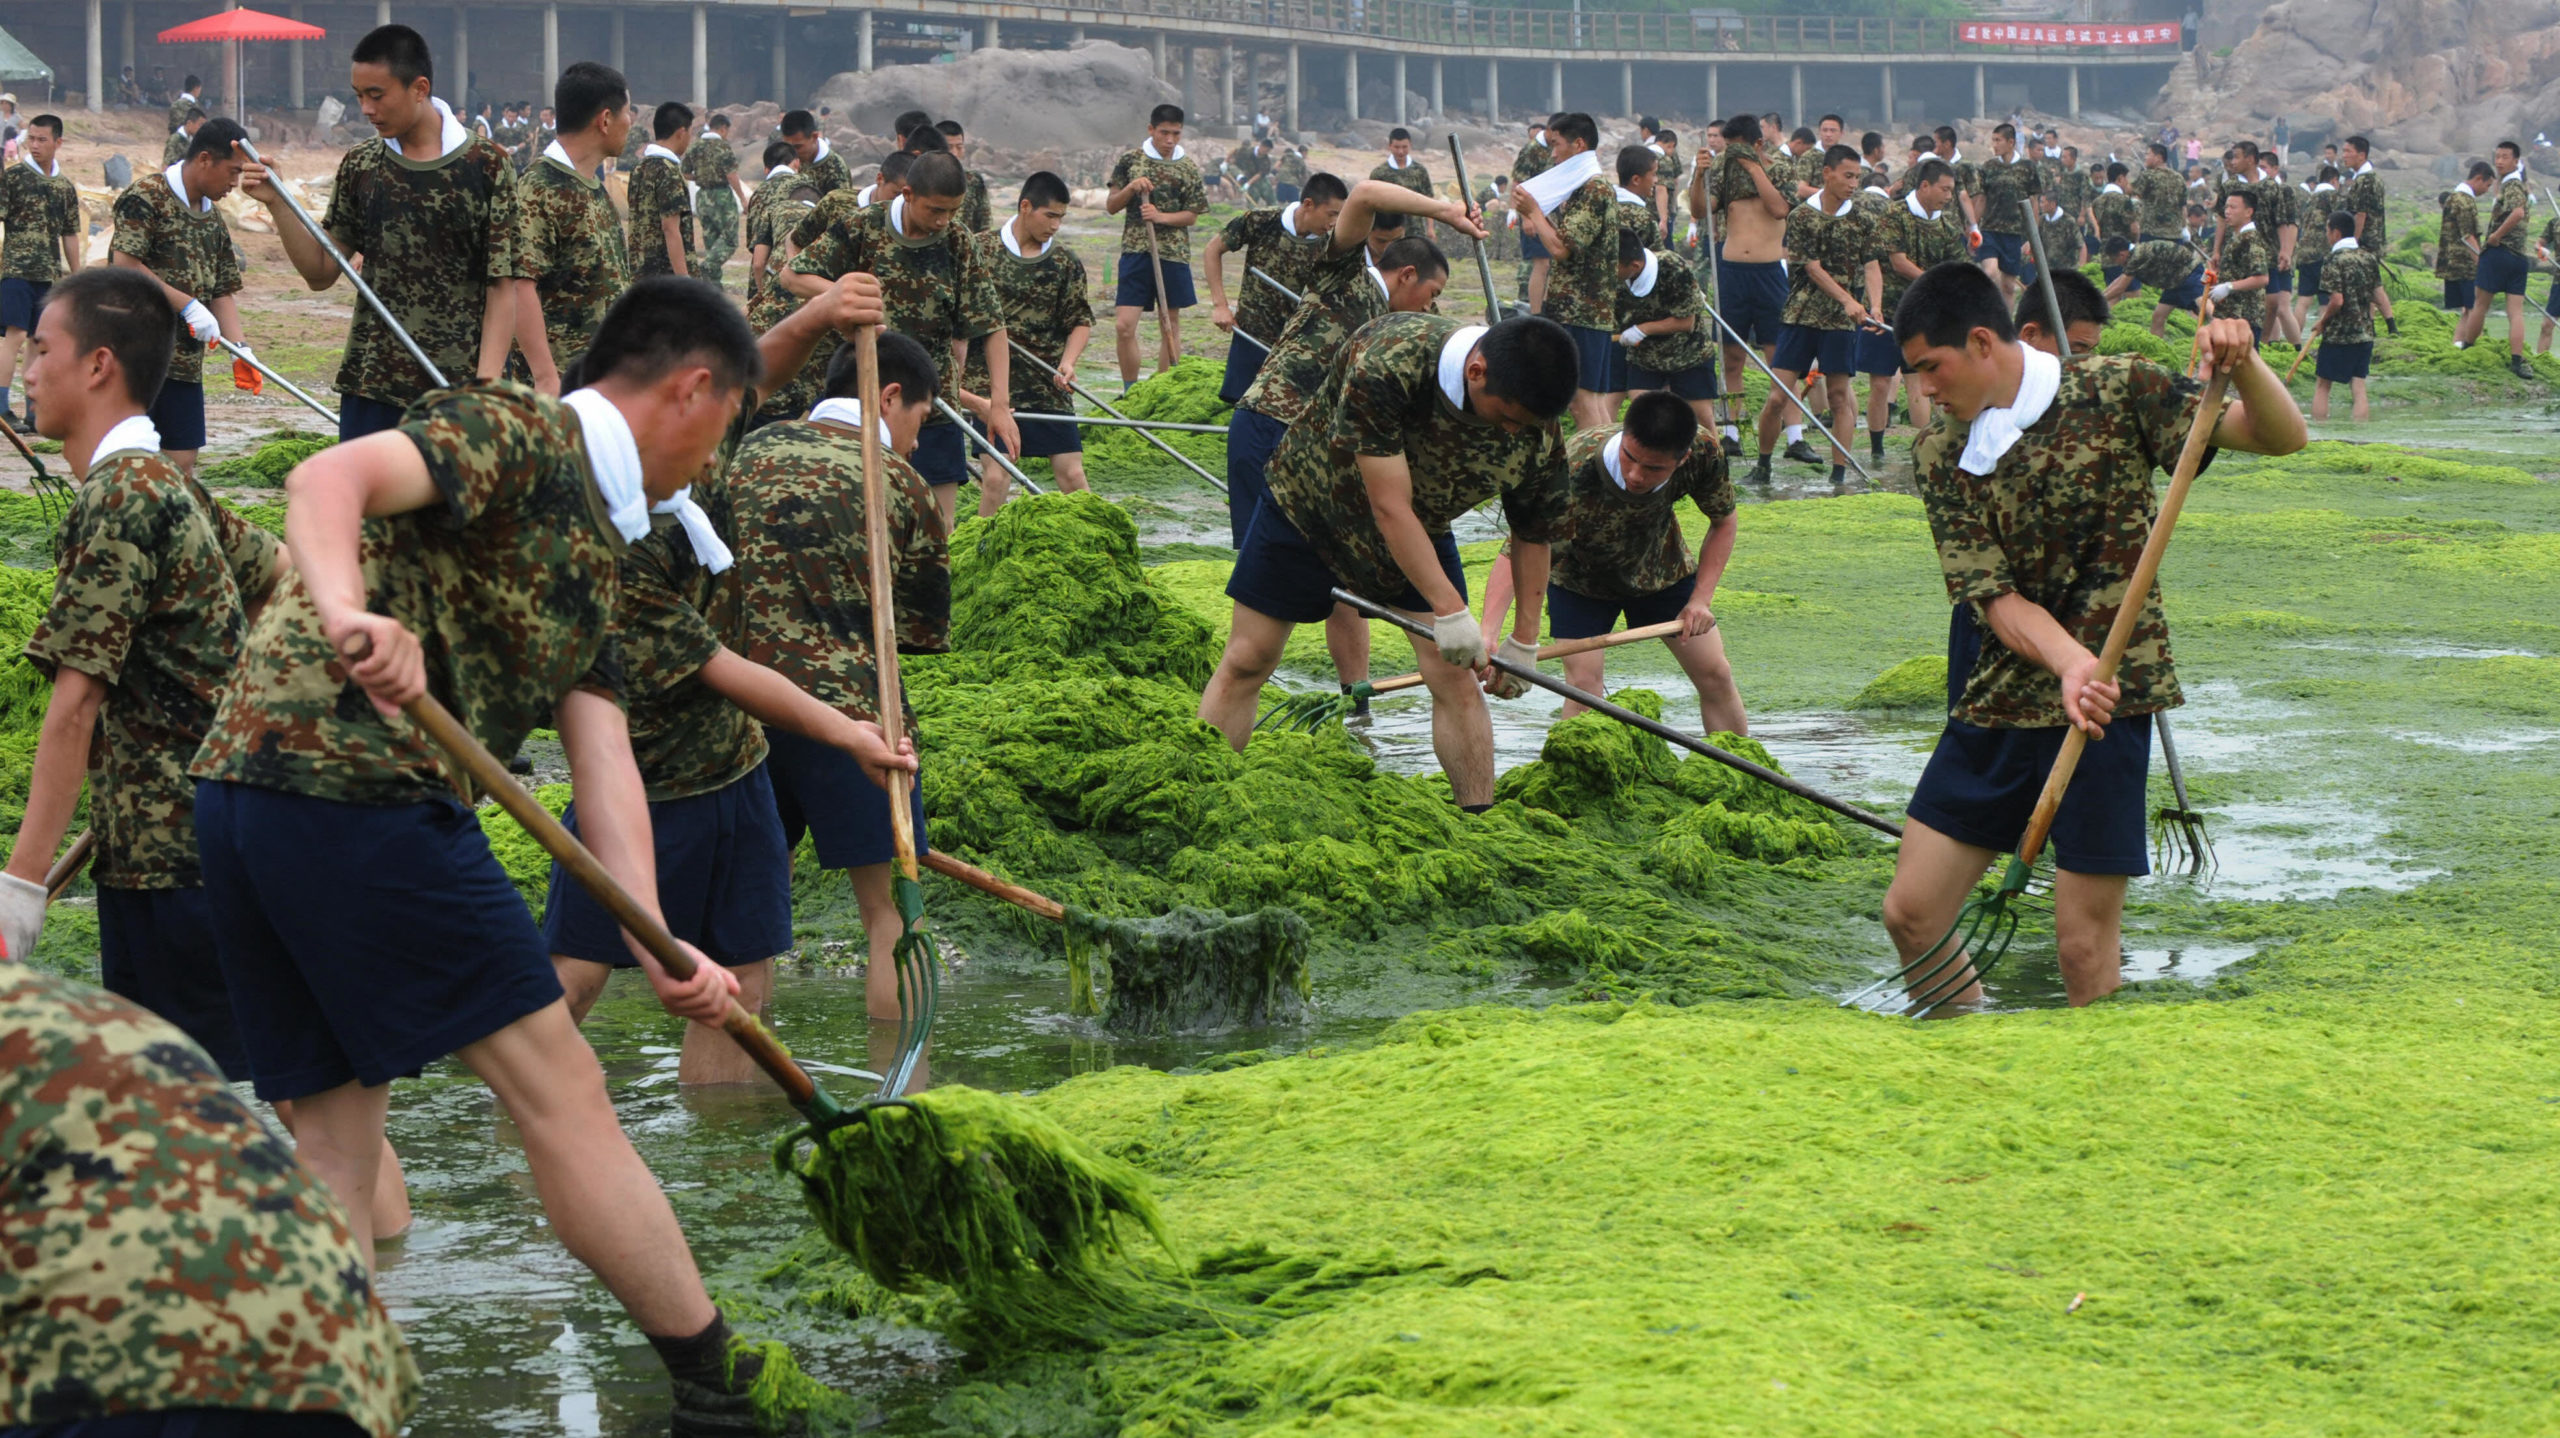 Soldiers removing smelly algae from a beach in Qingdao, China. (Photo: Mark Ralston, Getty Images)